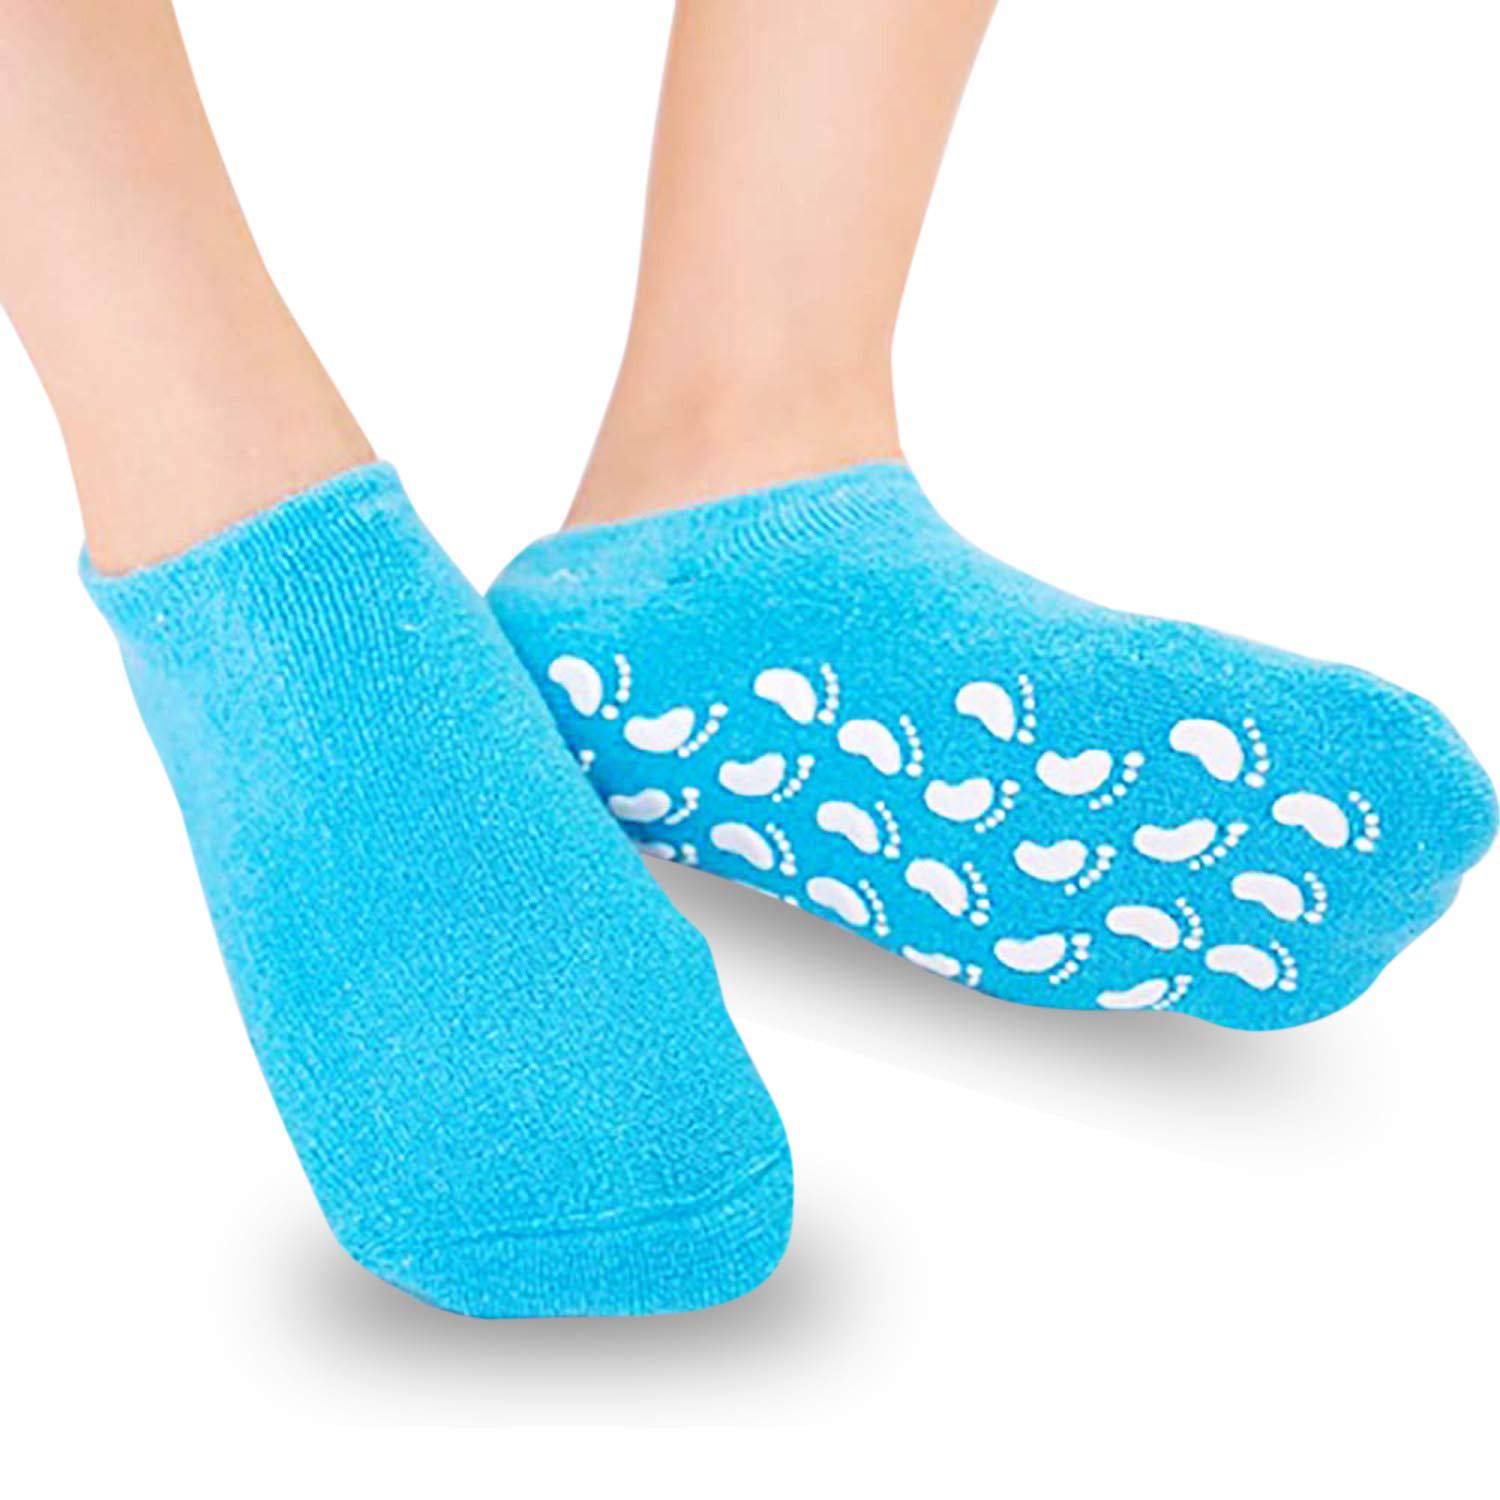 These moisturizing gel socks from add-ons are freaking awesome